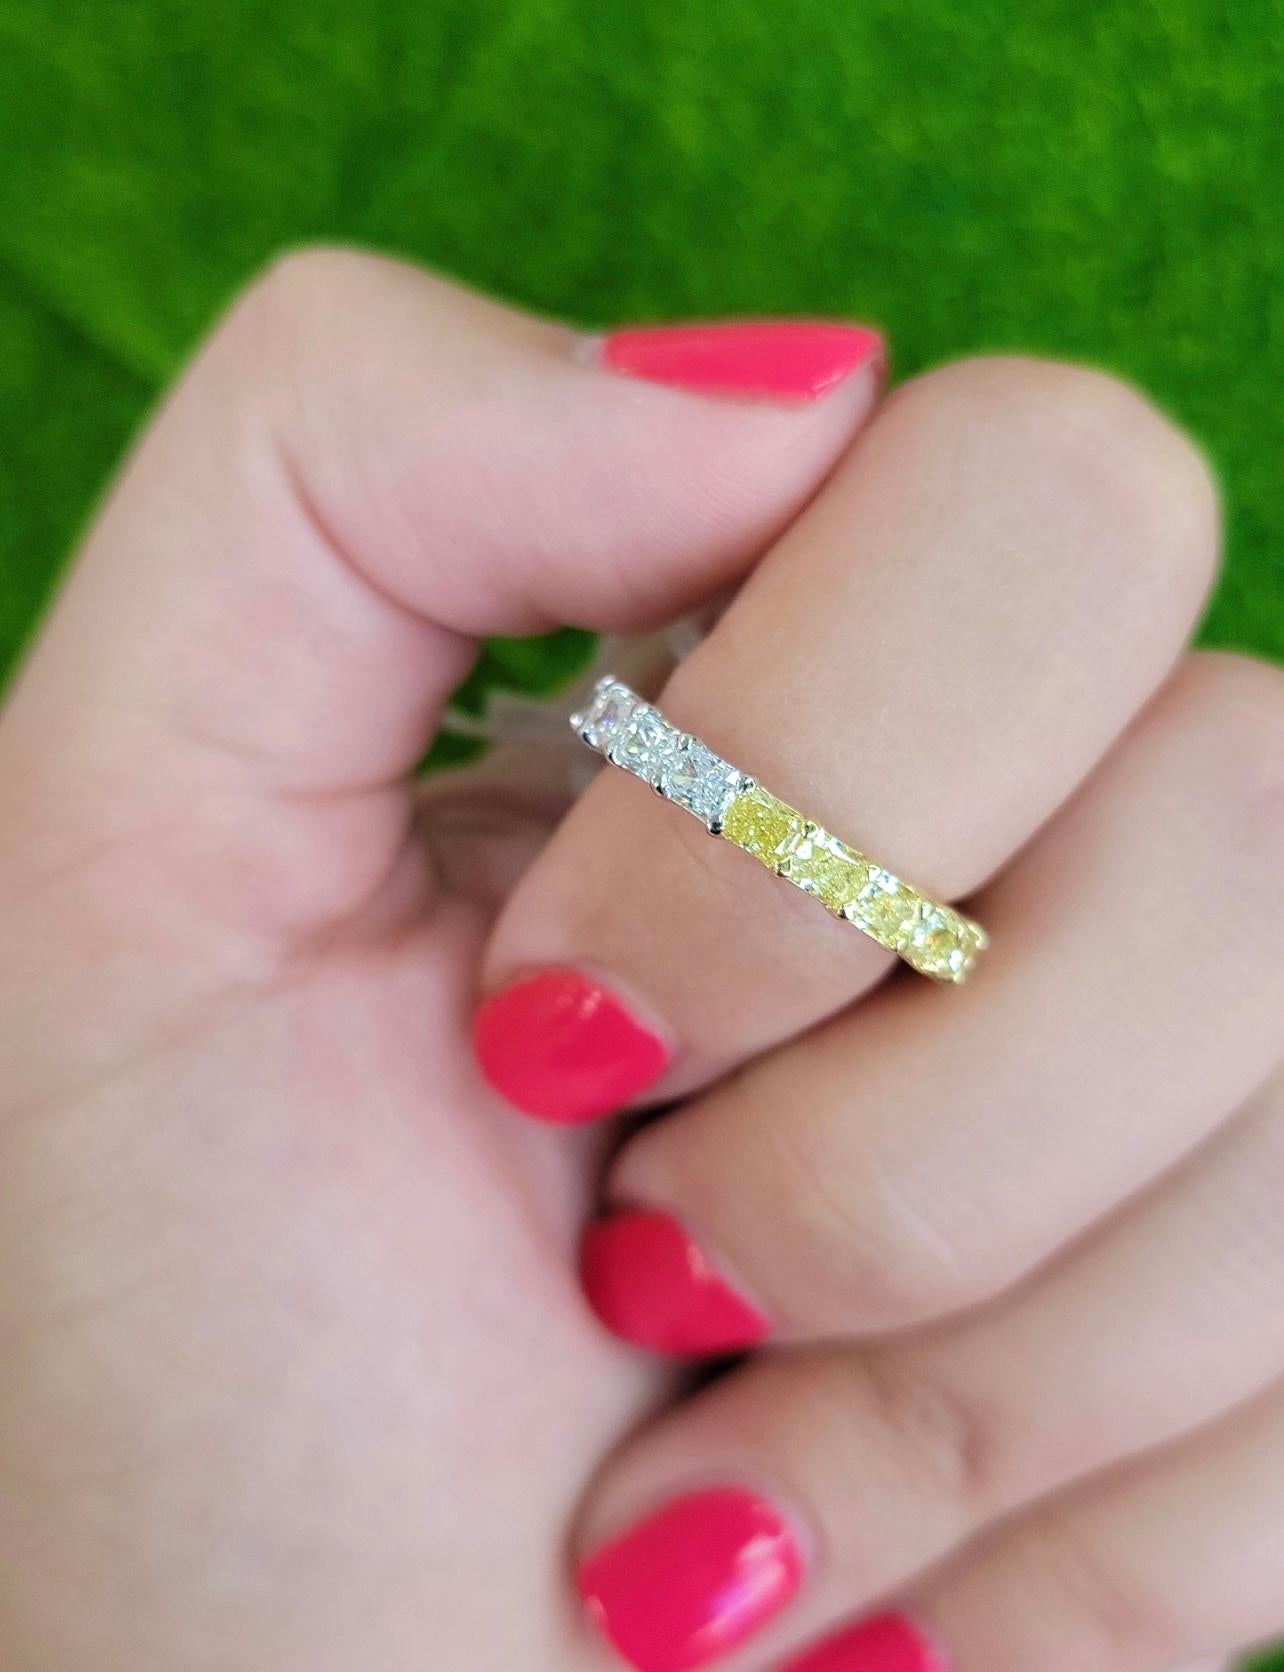 3.50 Total Carat Weight 
Fancy Yellow and E-F Color Diamonds
Elongated Radiant Cut diamonds
20 diamonds total
Average 0.17 carat per diamond
VS-VVS Clarity 
Set in 18k Yellow & Platinum 
Handmade in NYC 

Making Extraordinary Attainable with Rare